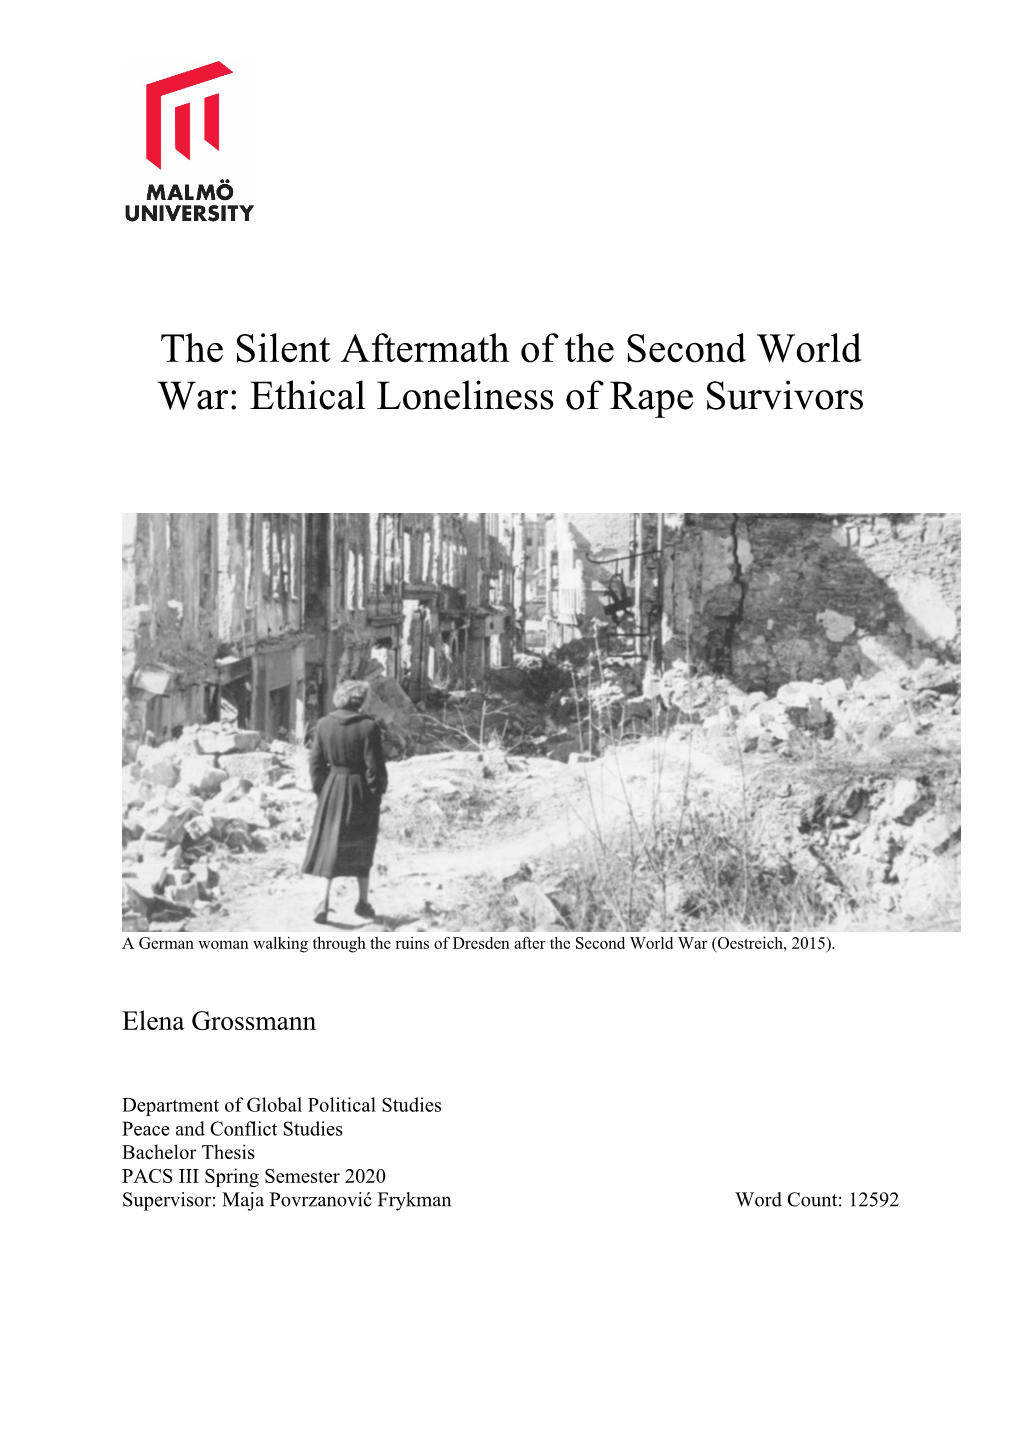 The Silent Aftermath of the Second World War: Ethical Loneliness of Rape Survivors